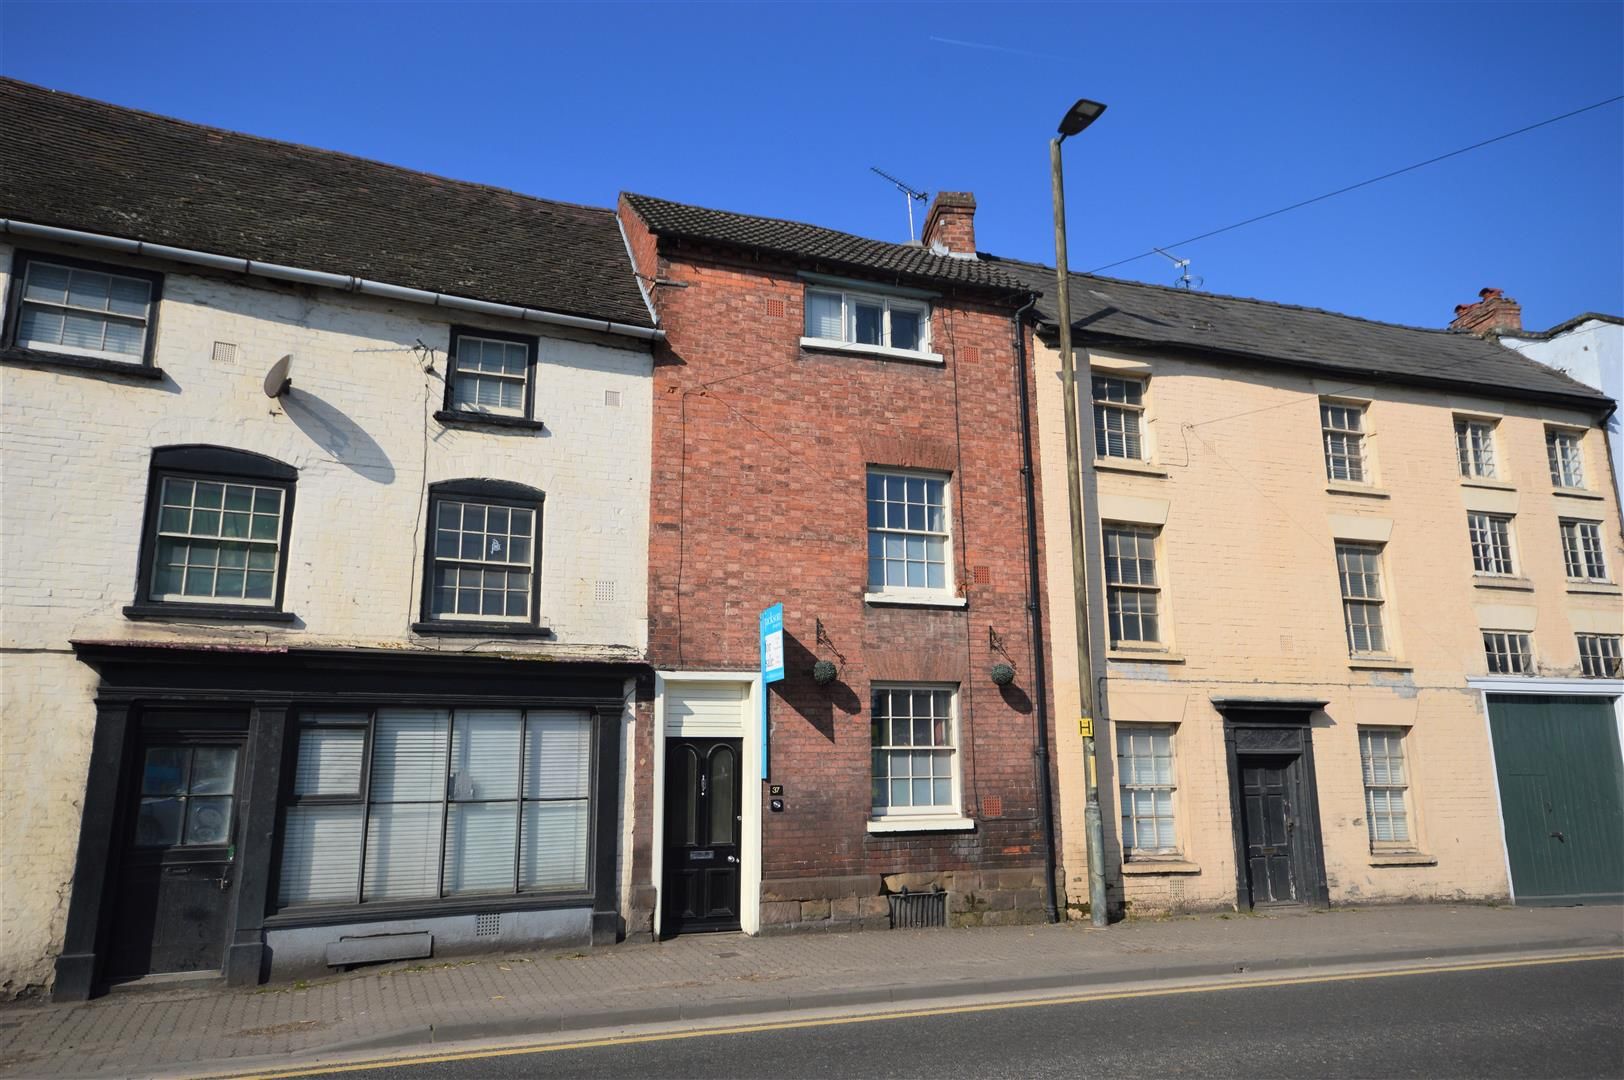 5 bed town house for sale in Leominster 1